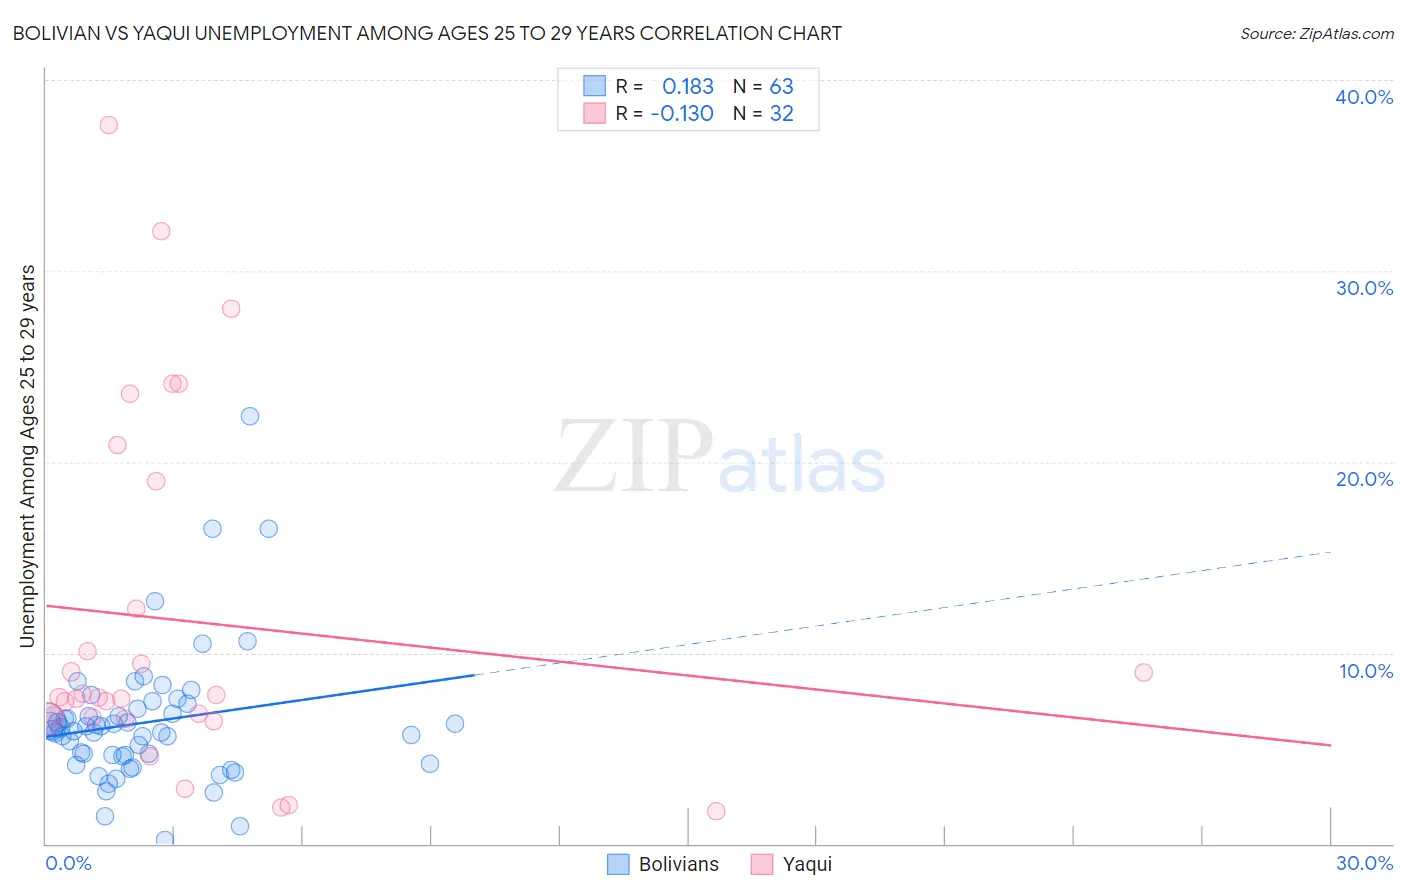 Bolivian vs Yaqui Unemployment Among Ages 25 to 29 years